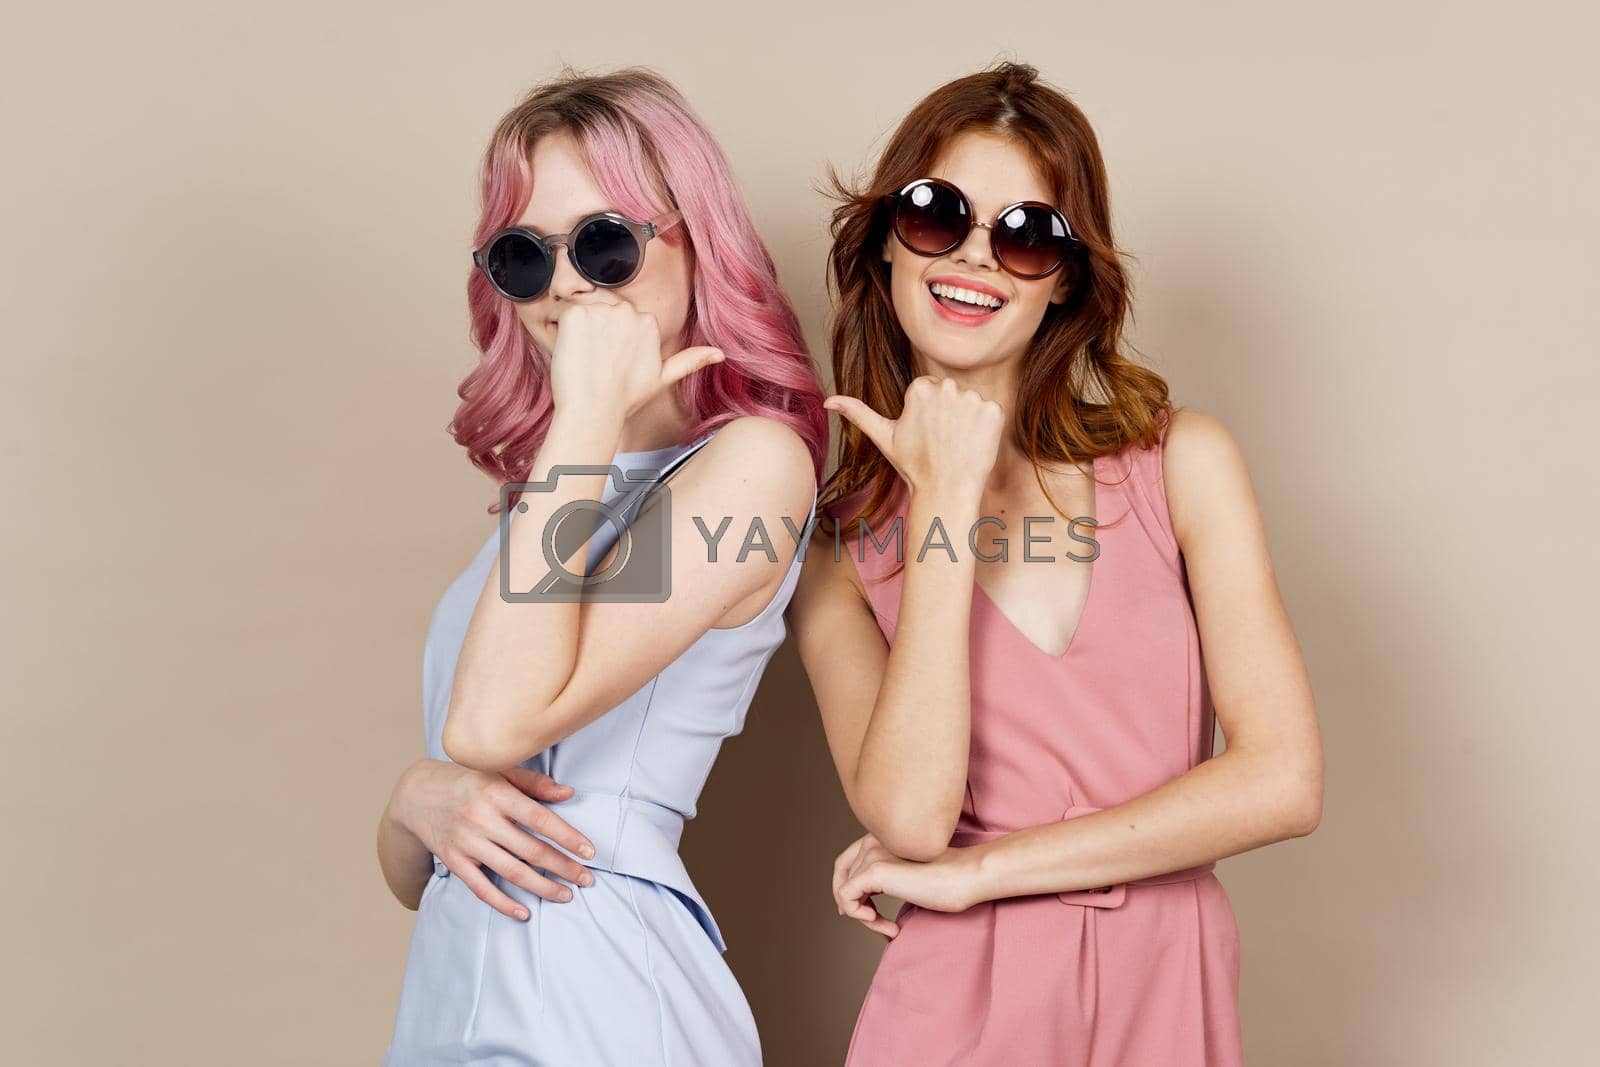 Royalty free image of two girlfriends stand side by side fashion clothing glamor posing by Vichizh